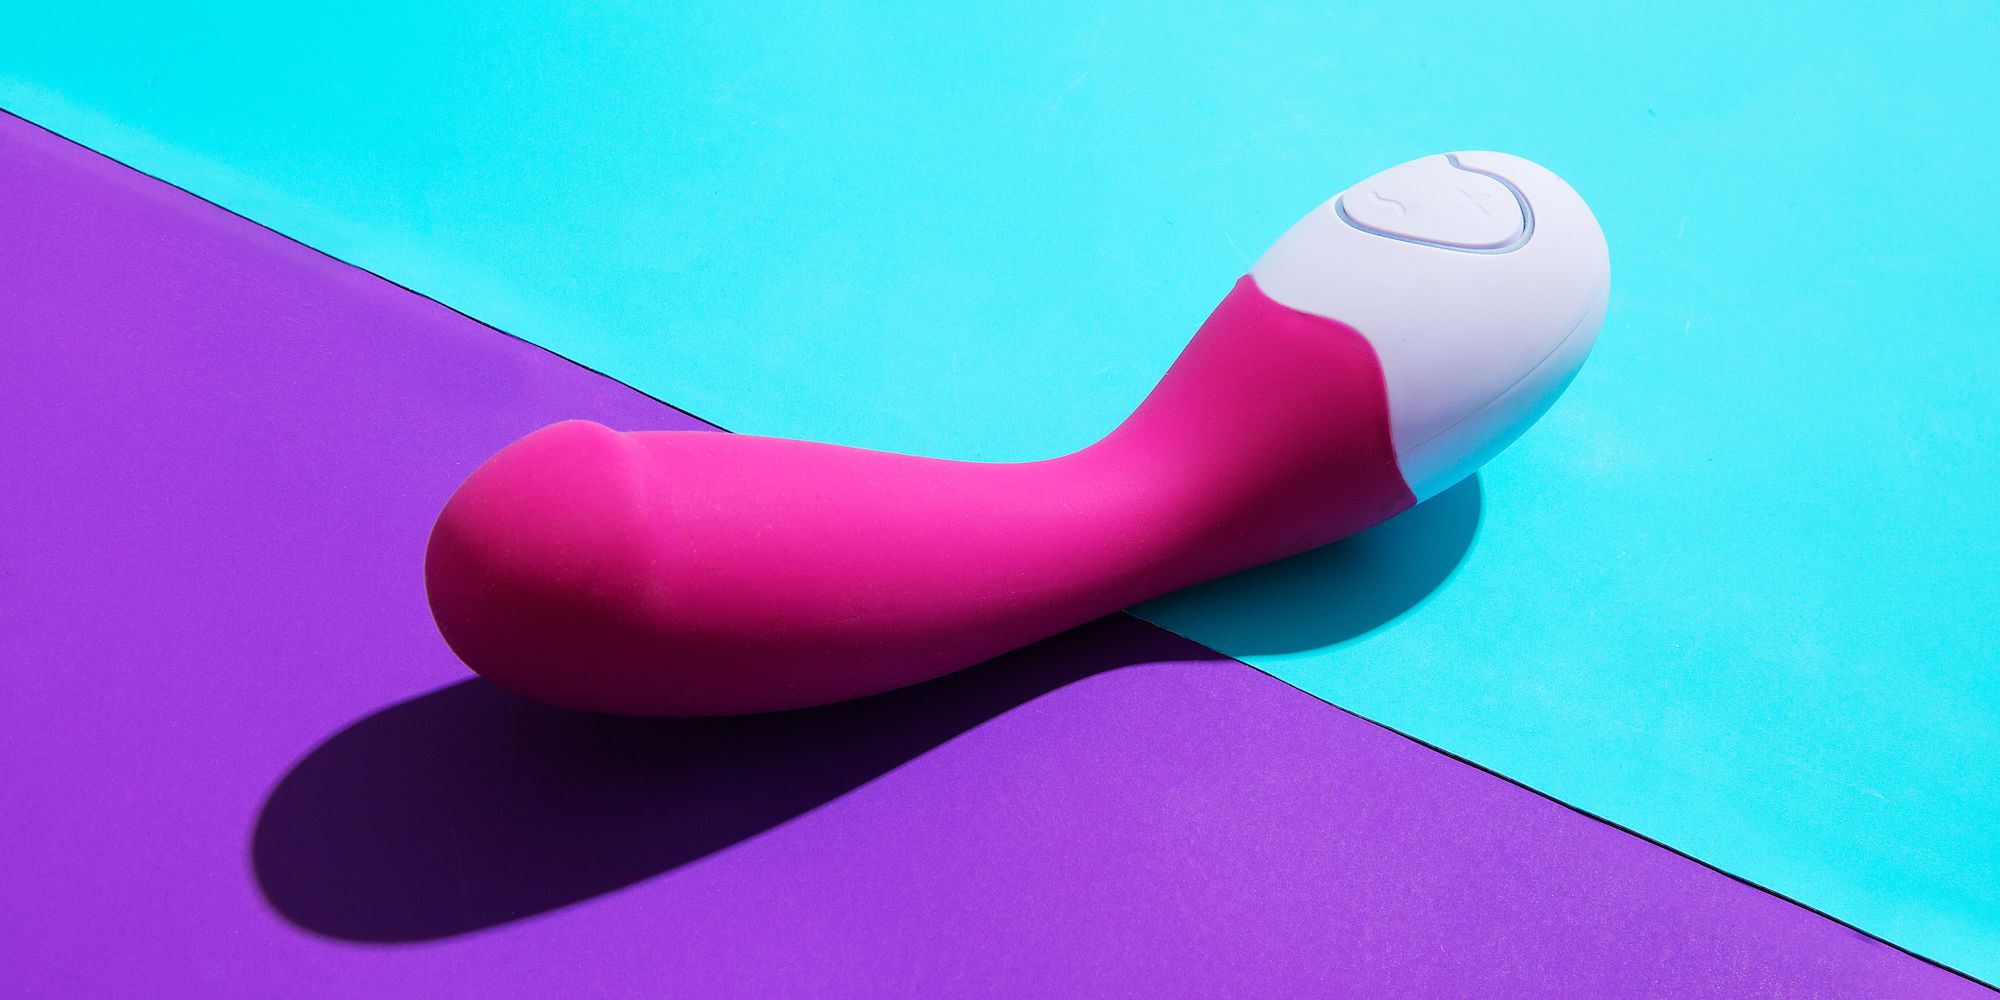 ammarah qureshi recommends how to squirt using a vibrator pic